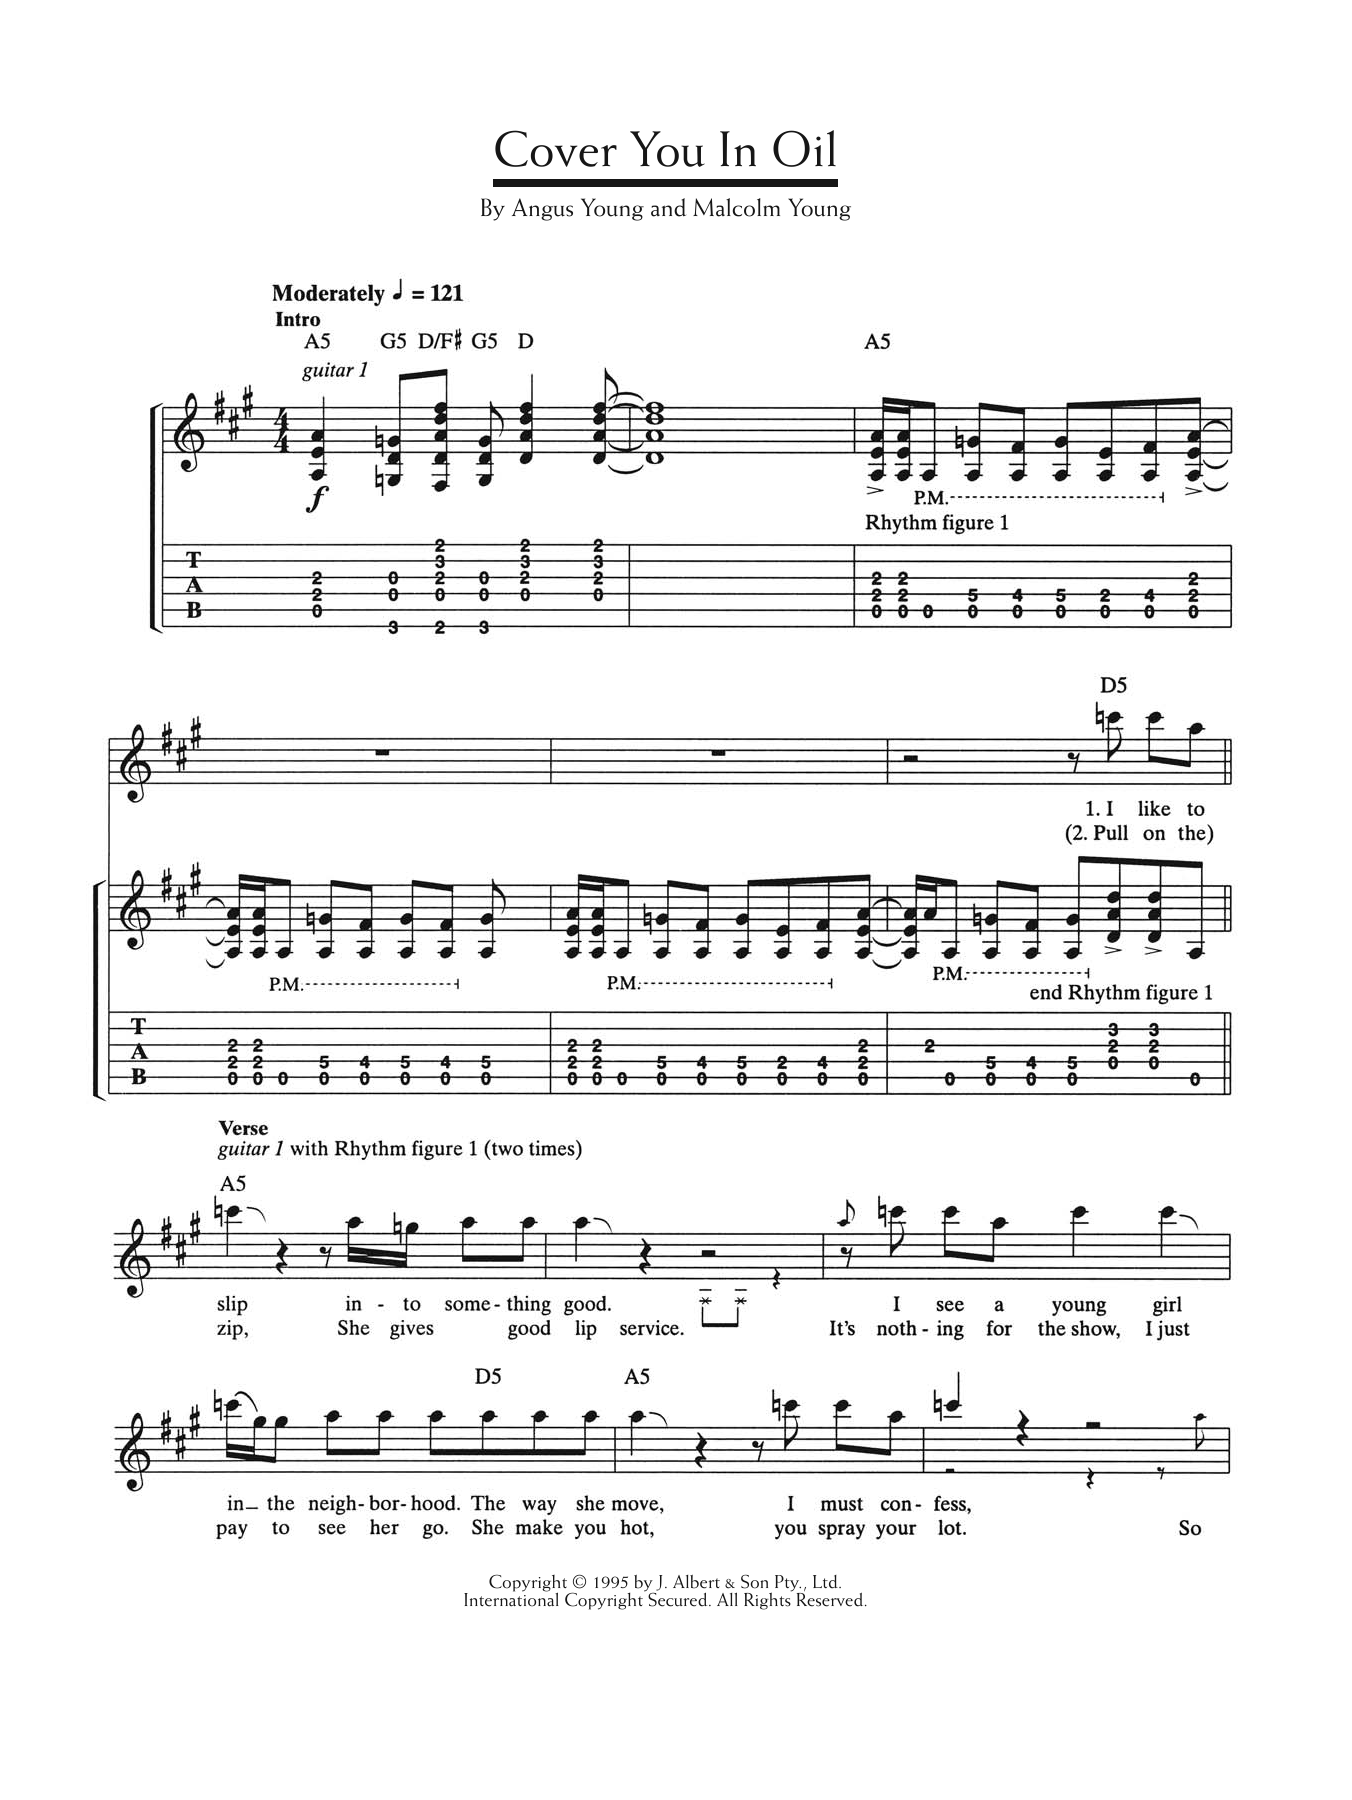 Download AC/DC Cover You In Oil Sheet Music